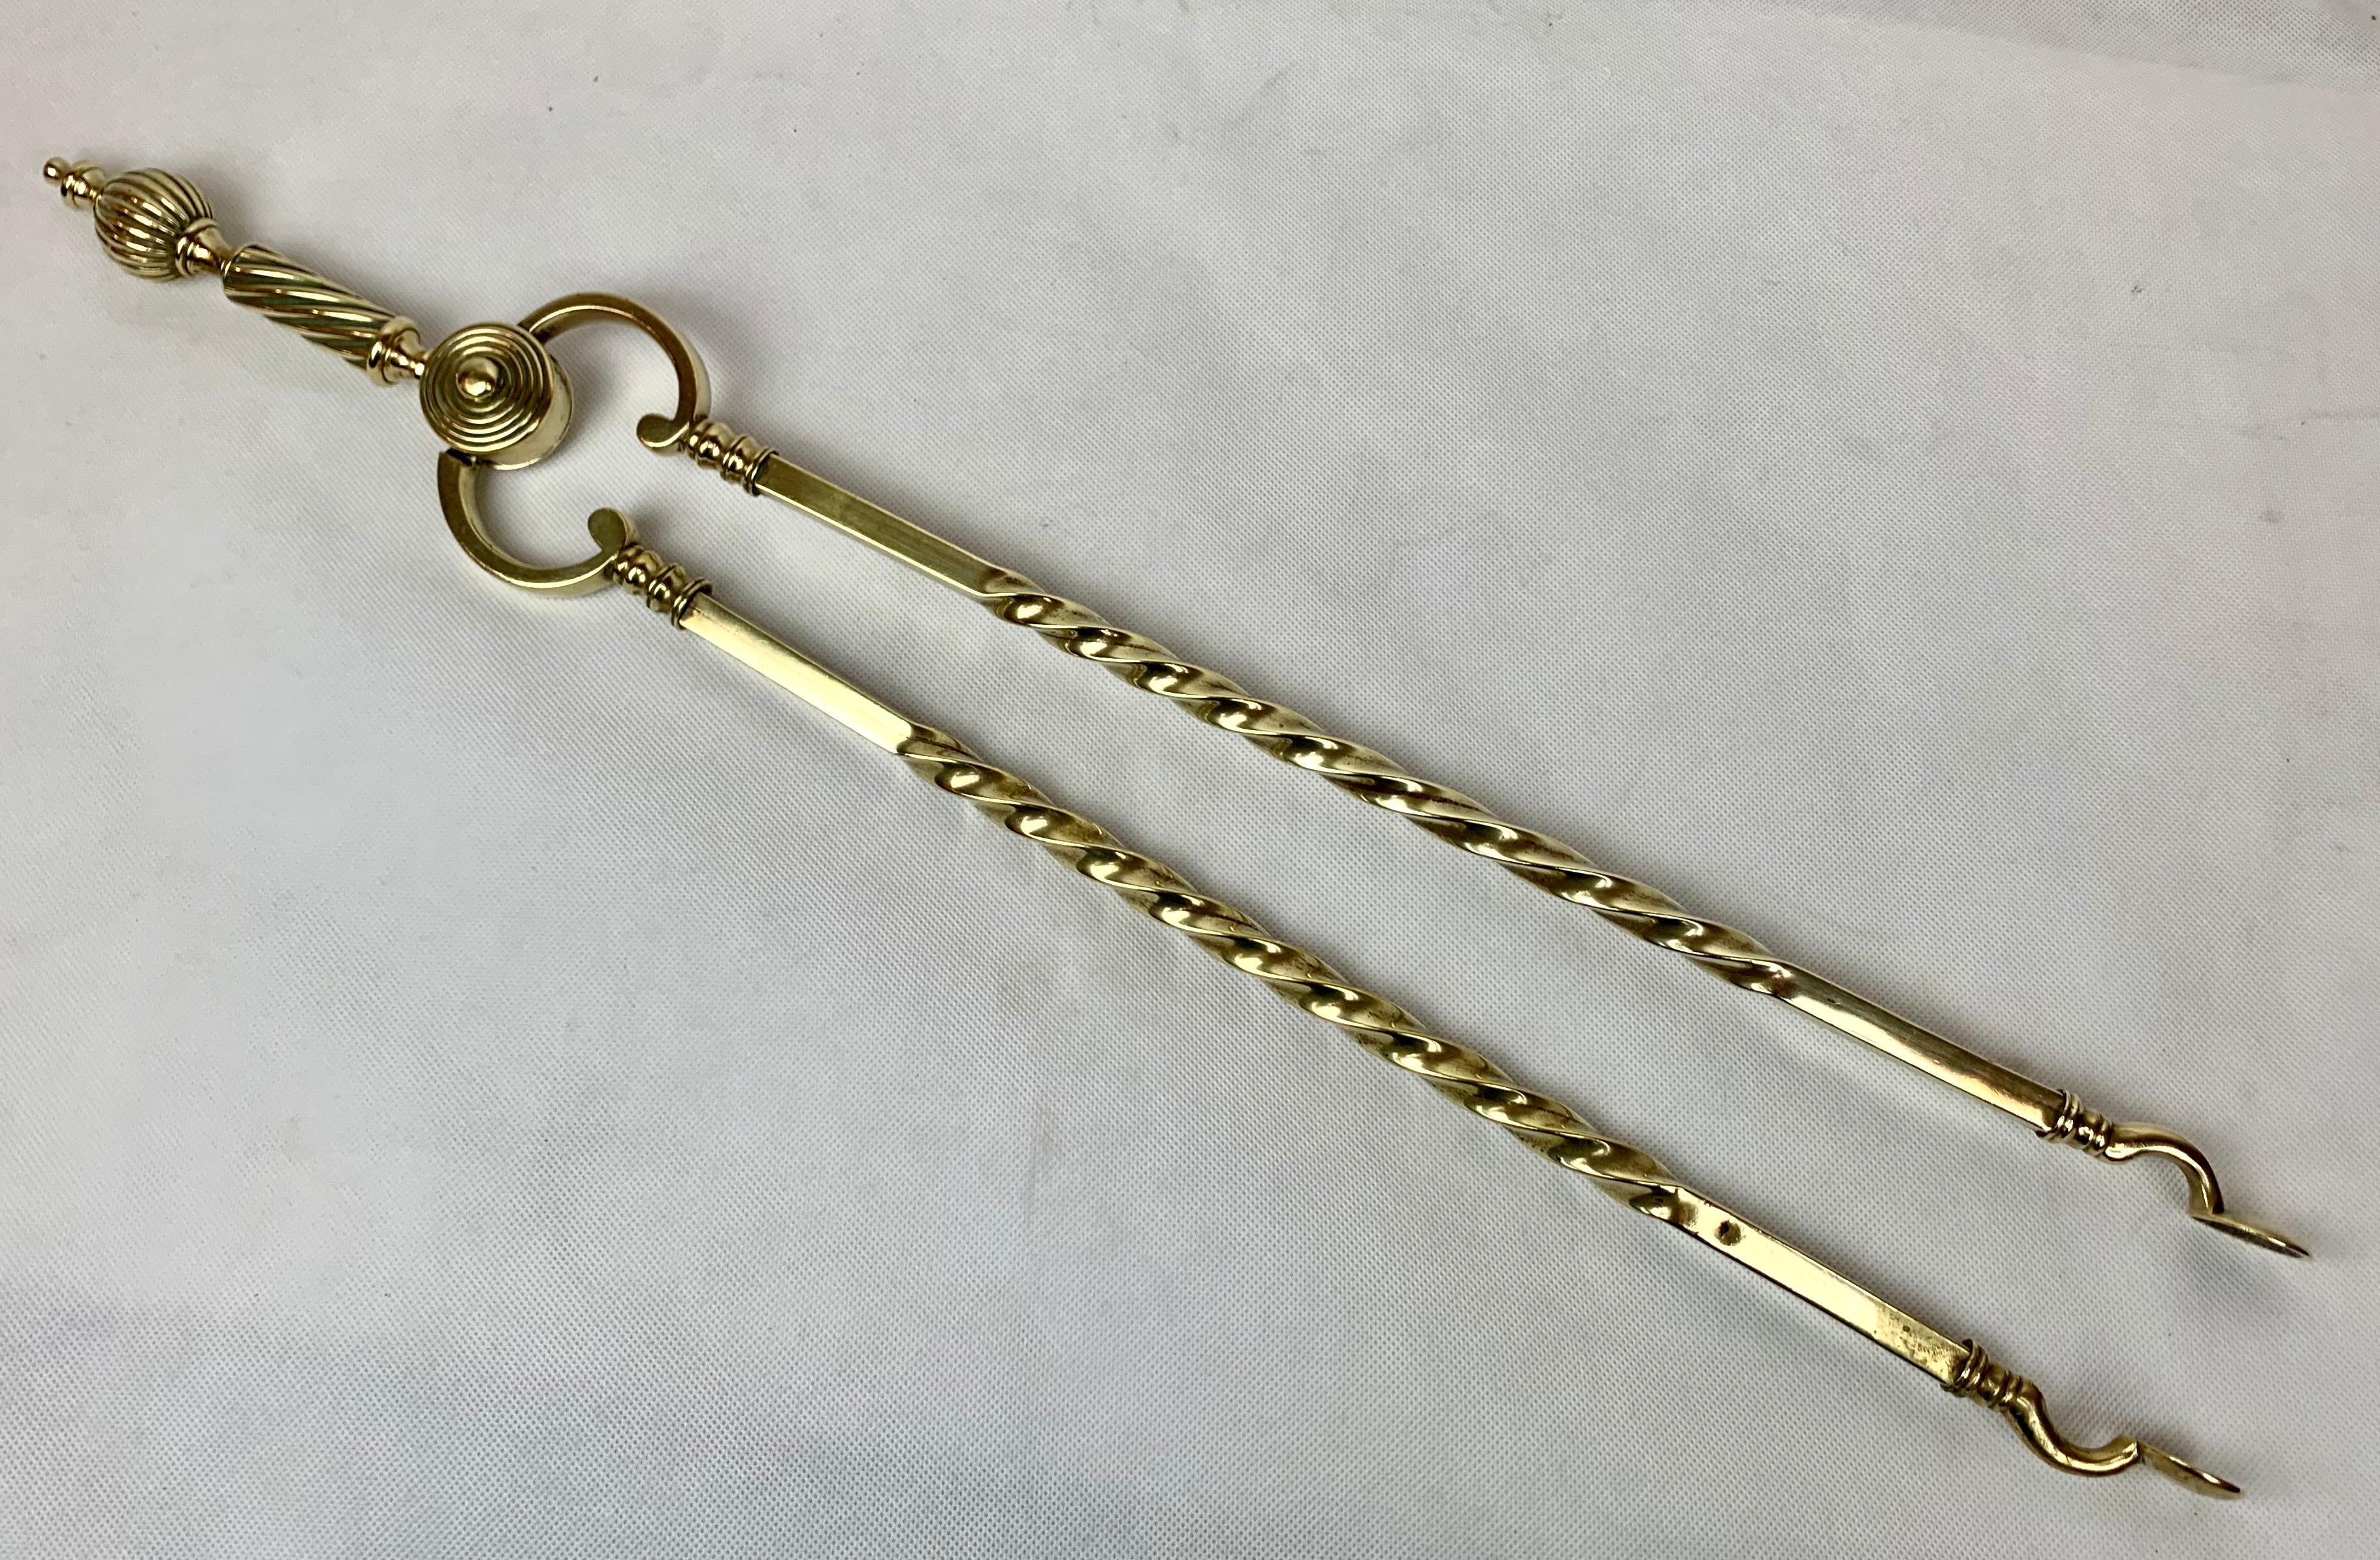 English Fireplace Tongs in Solid Brass-England, 19th c.